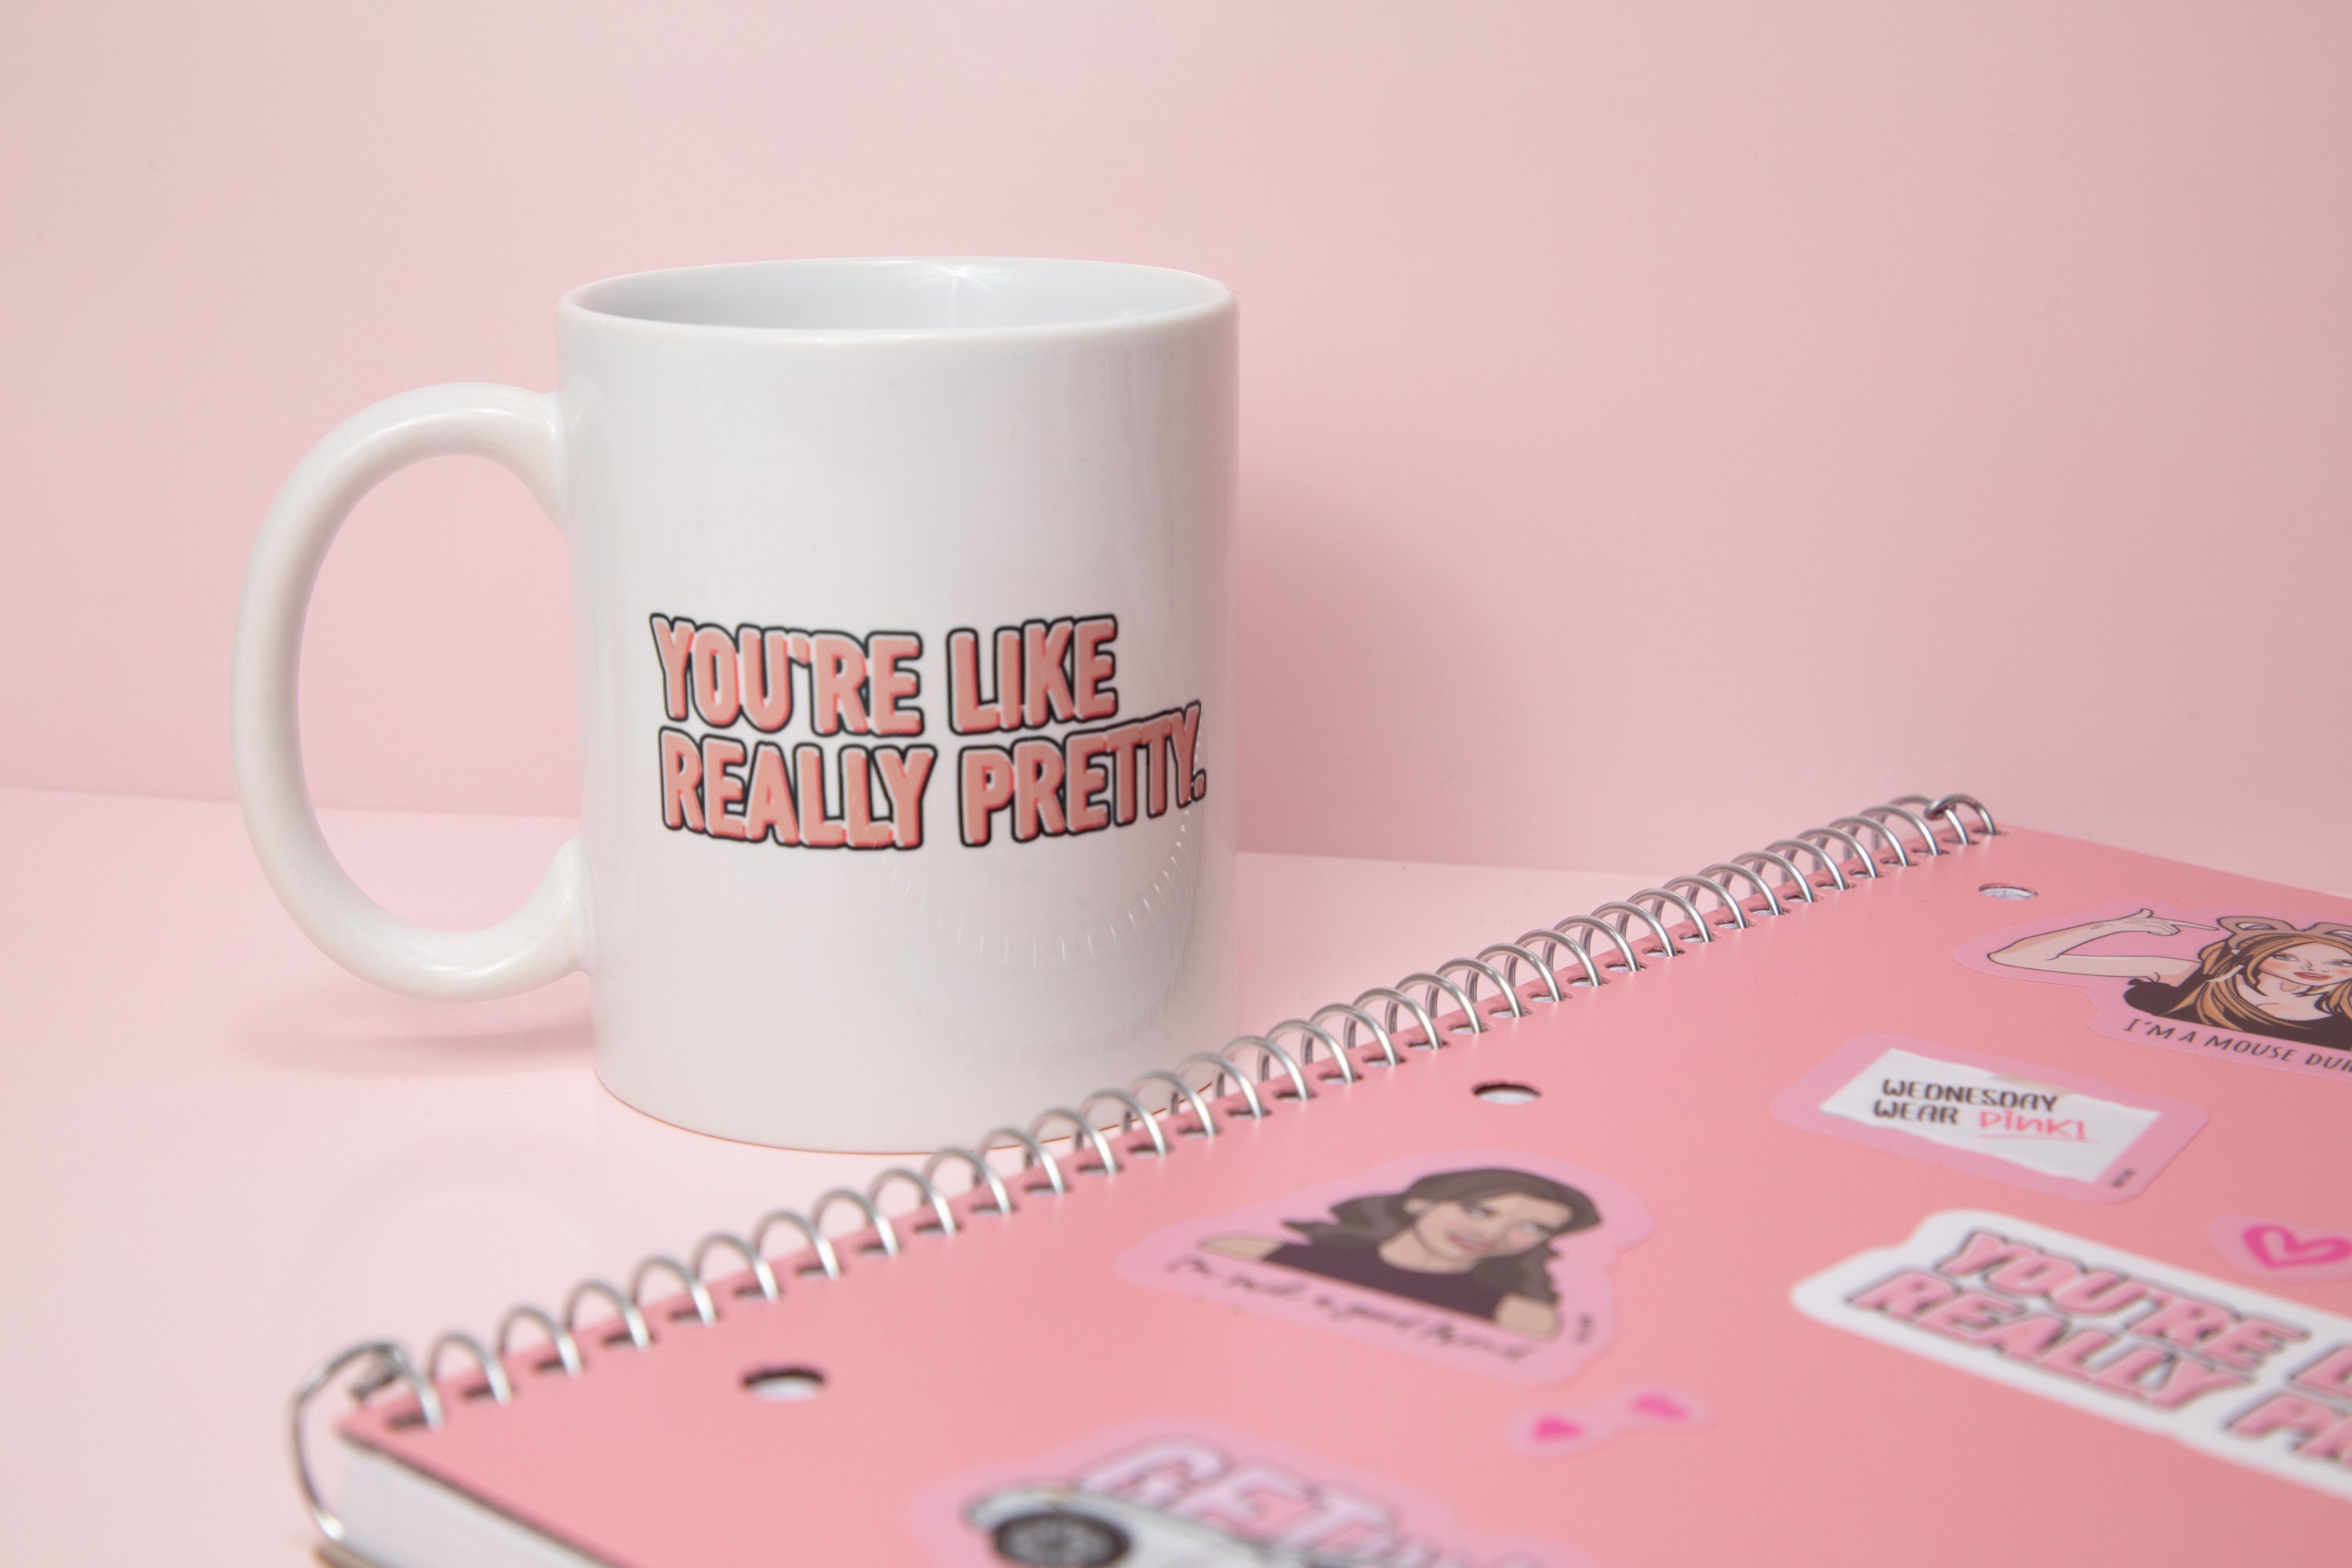 Here's the youre like really pretty mean girls cup and they have a bla